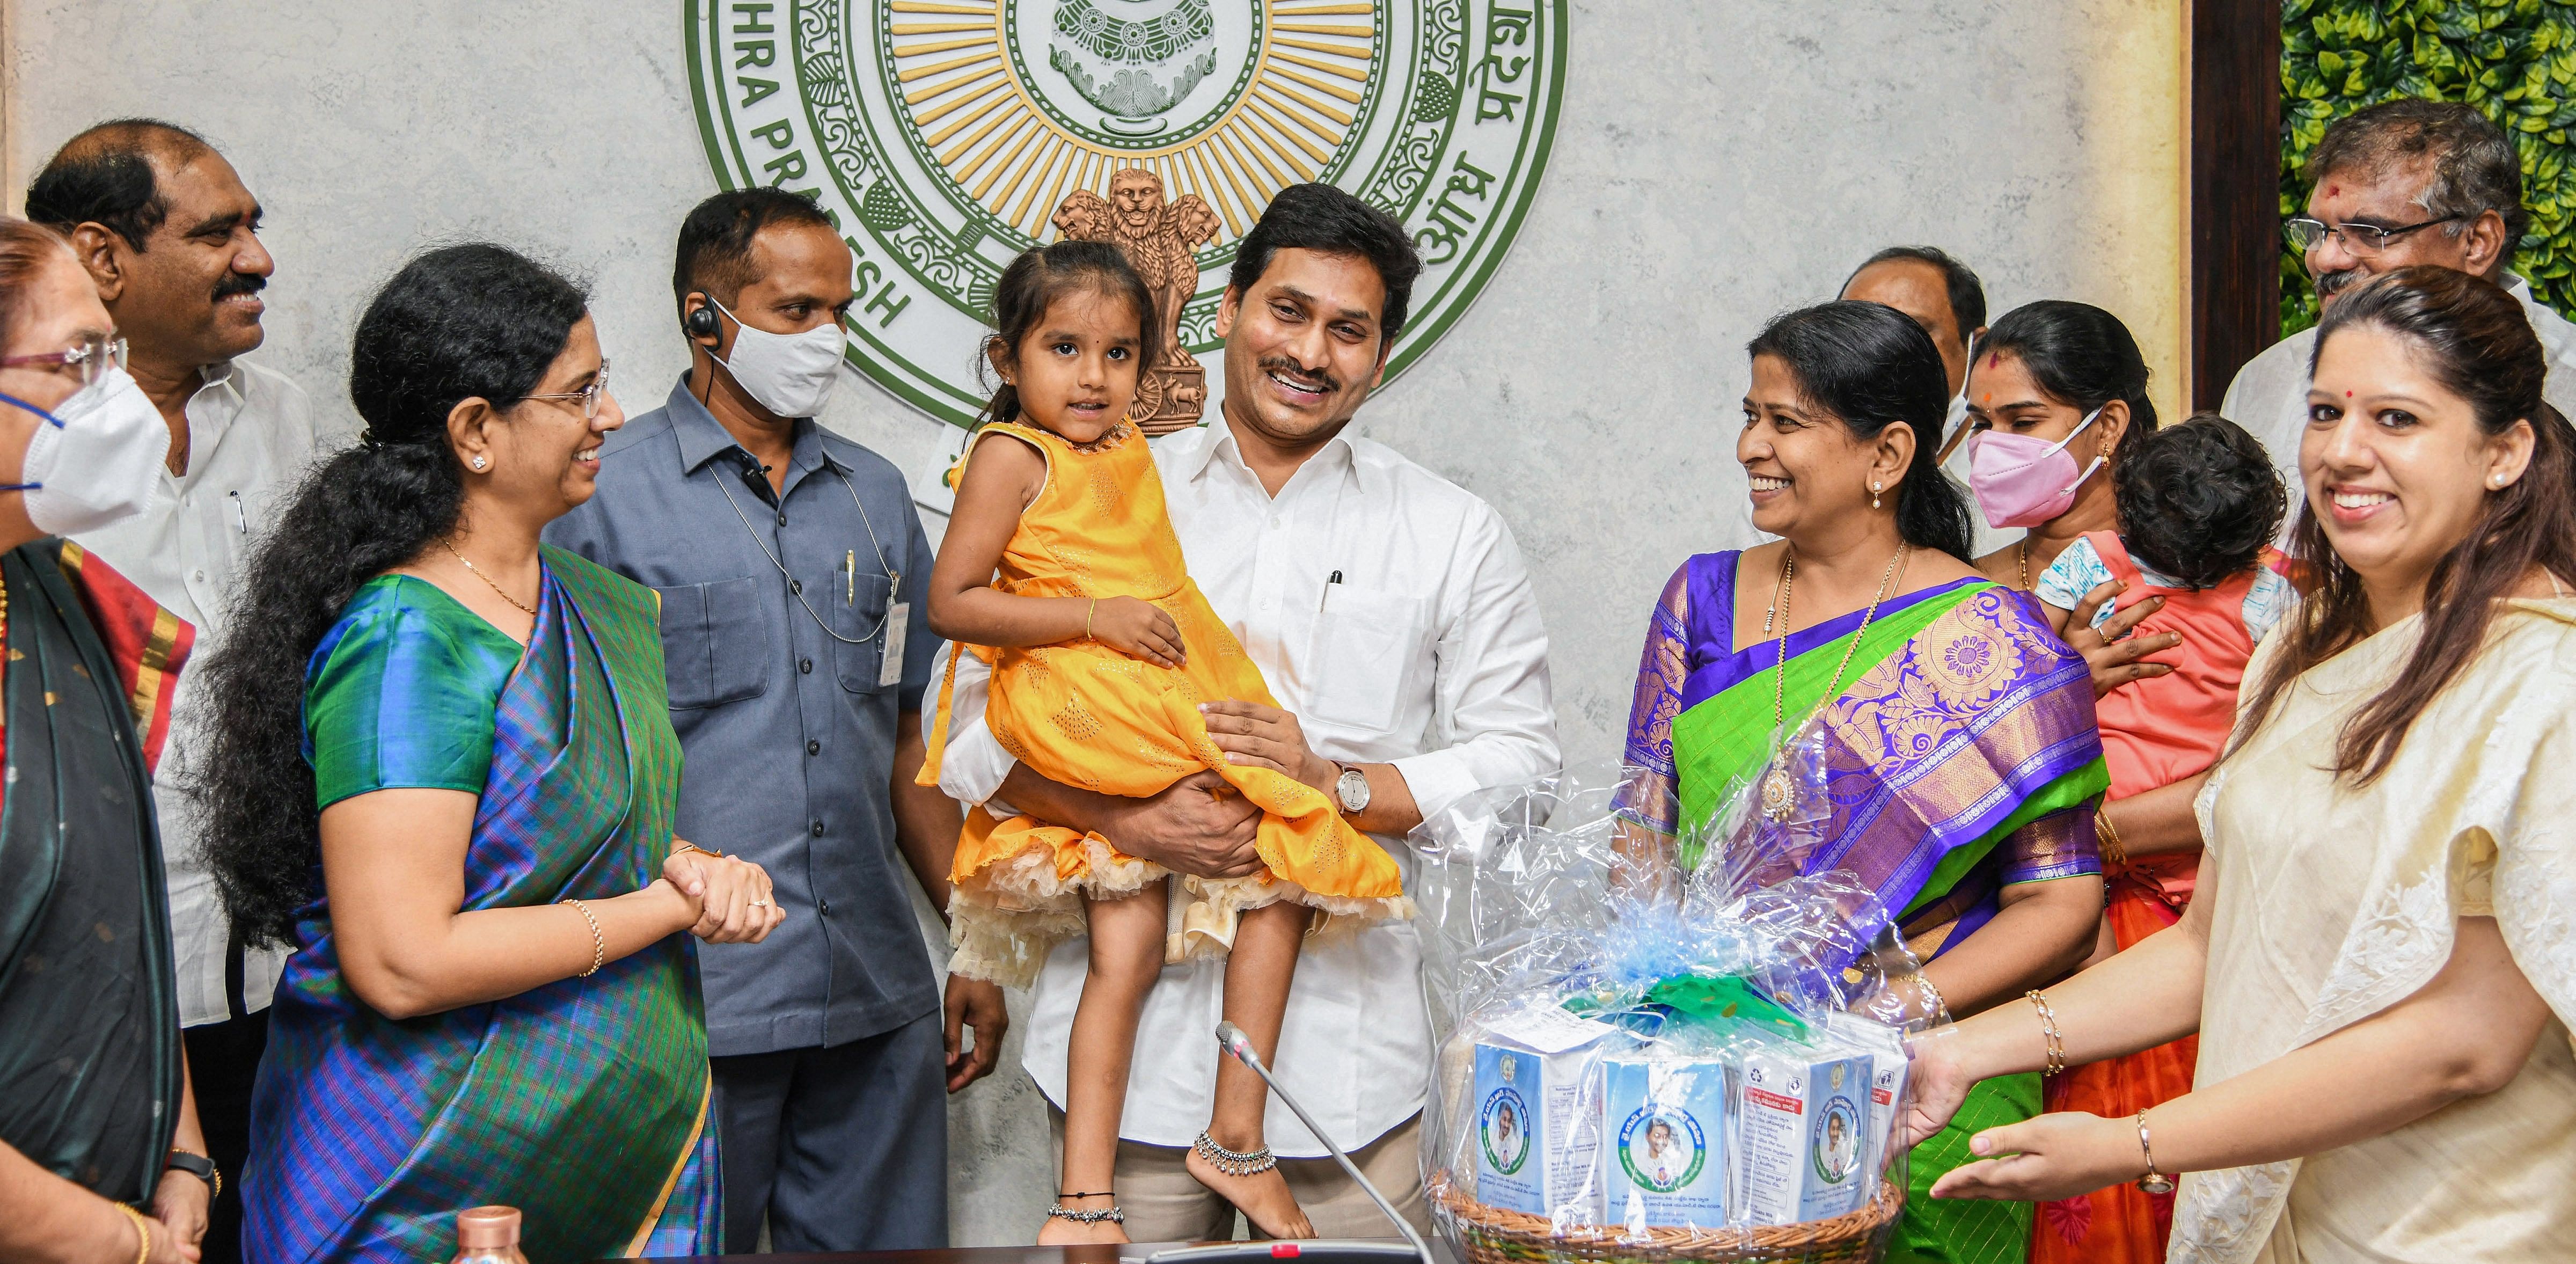 Andhra Pradesh Chief Minister Y S Jagan Mohan Reddy holds a during the inauguration of  YSR Sampoorna Poshana Plus and YSR Sampoorna Poshana schemes for pregnant and lactating mothers, at the Camp Office, Tadepalli in Guntur district, Monday, Sept. 7, 2020. Credit: PTI Photo